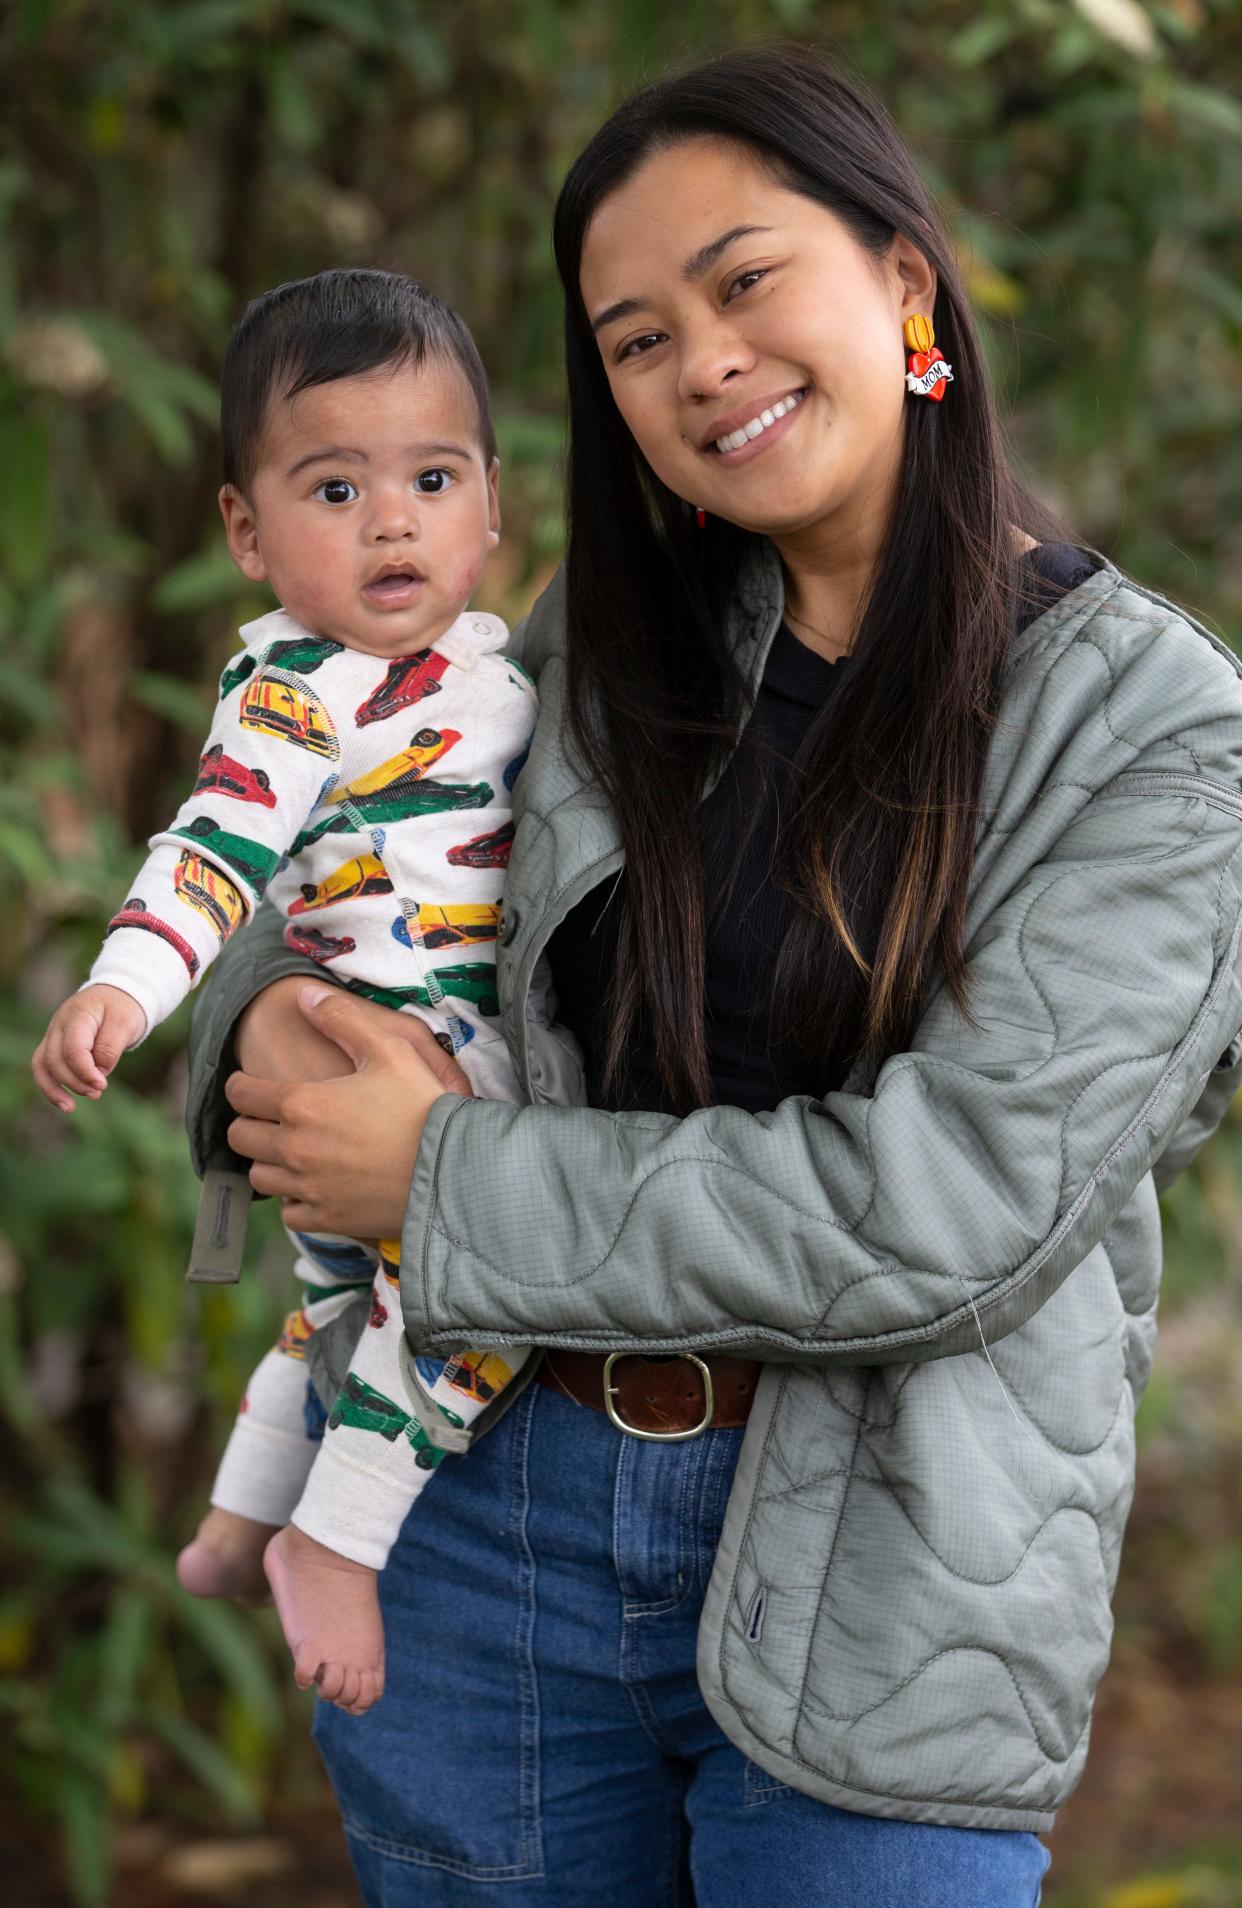 Clarisse Mendoza of Bradley Beach and her baby Rafael Martinez, who is 6 months old. They attend group therapy sessions at the Perinatal Mood & Anxiety Disorders Center for postpartum depression.
Eatontown, NJ
Thursday, May 9, 2024